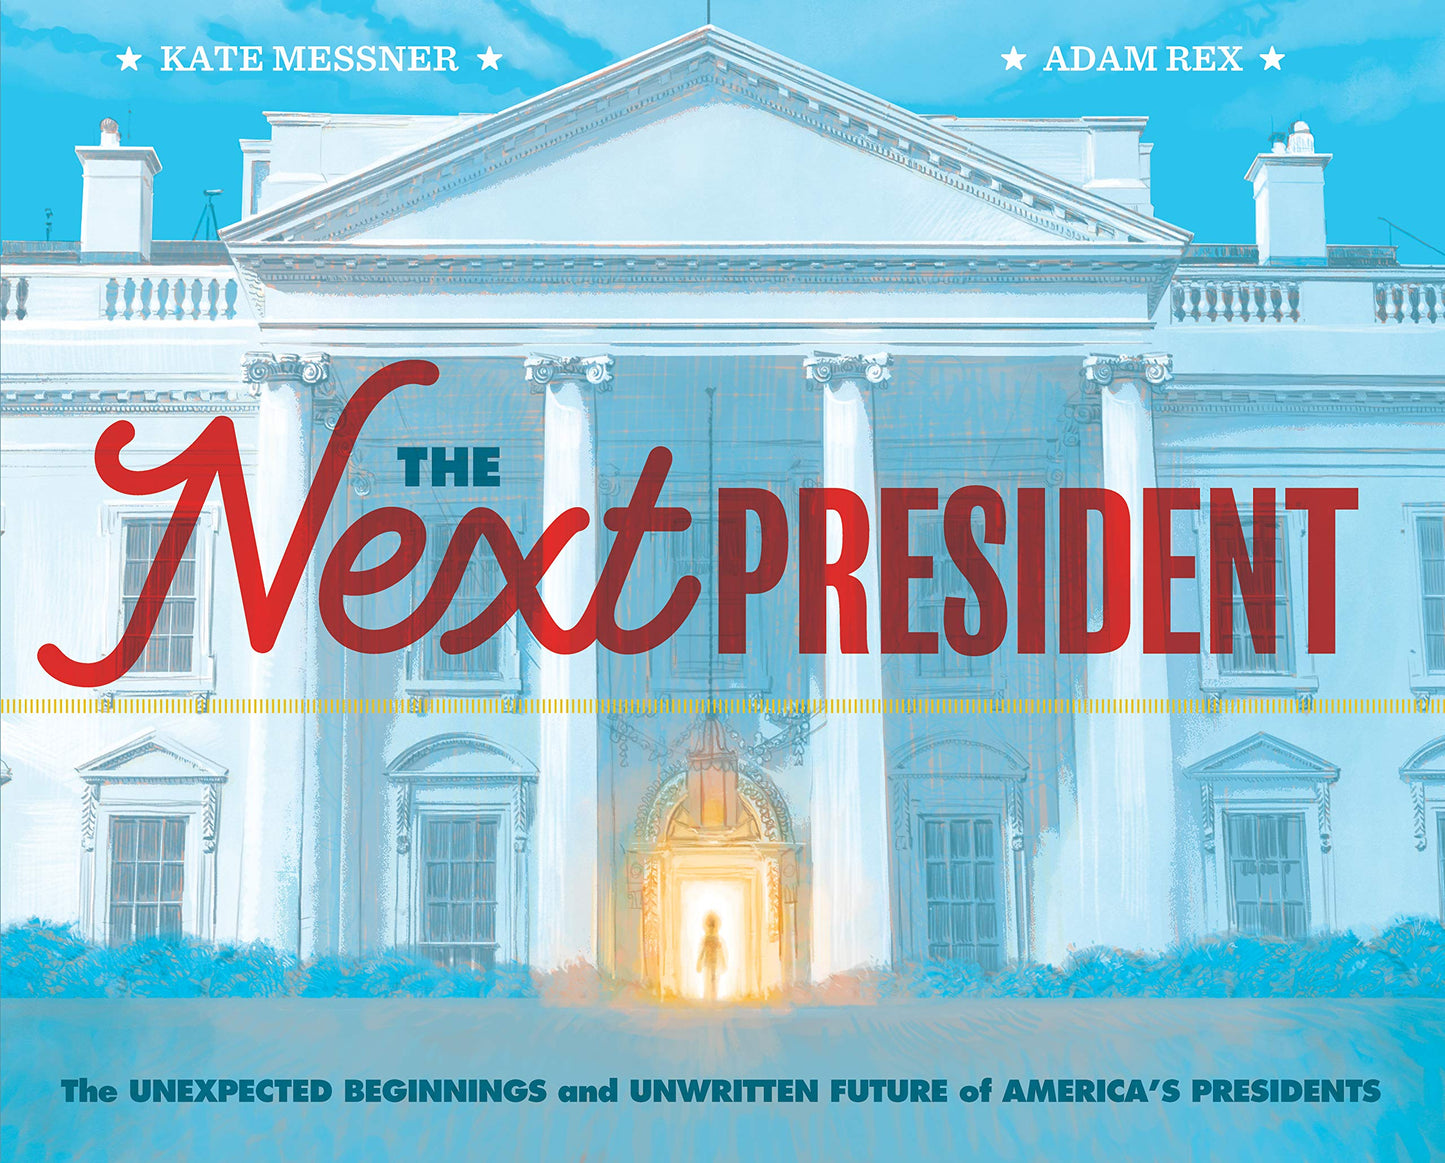 Cover photo of “The Next President” family book.